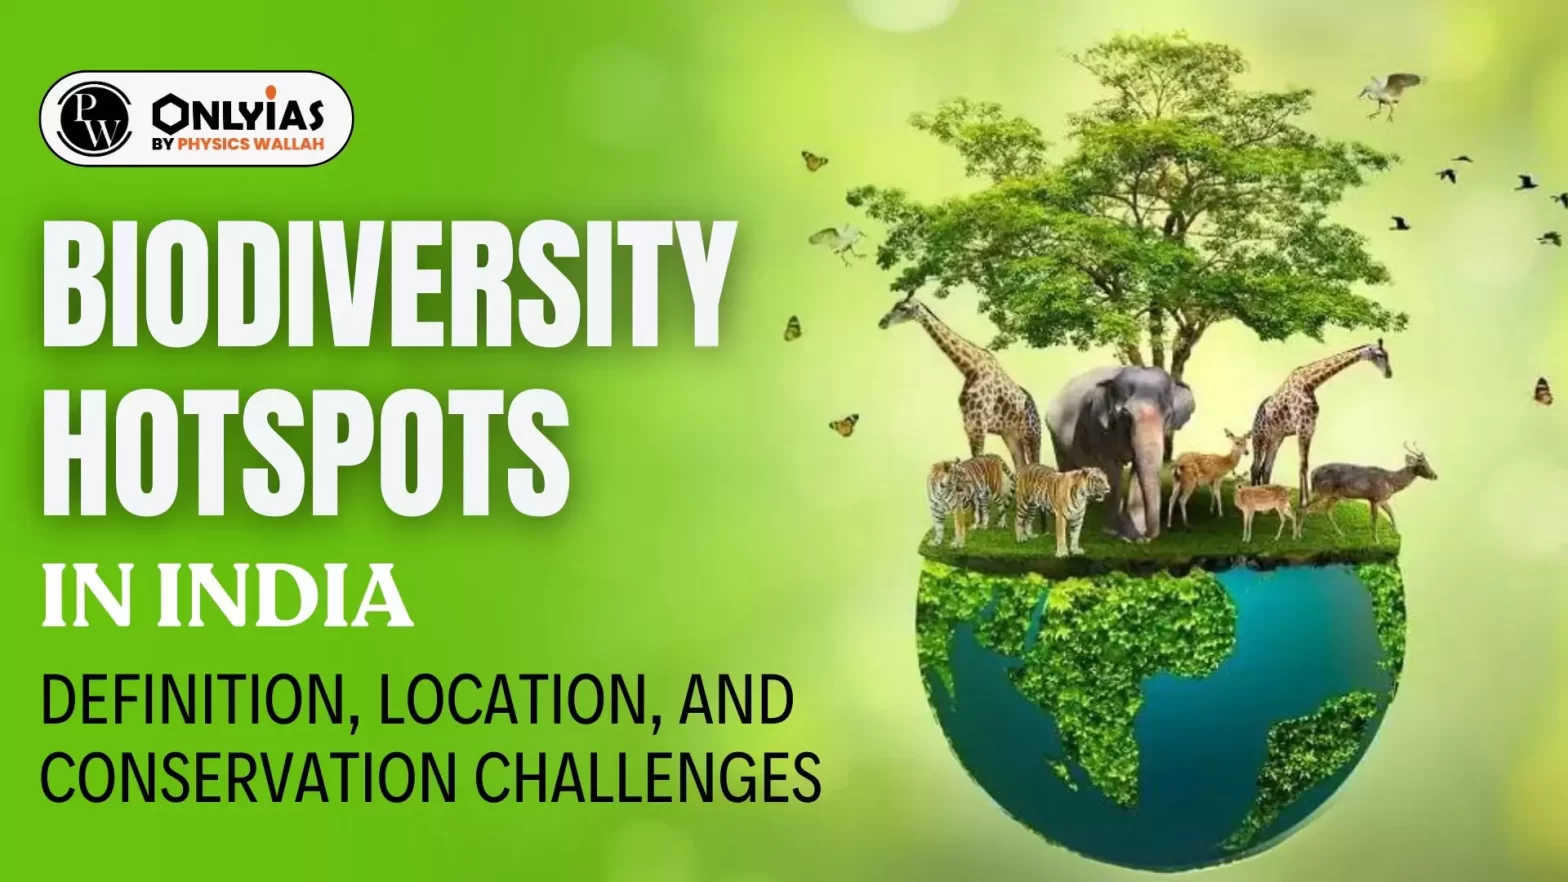 Biodiversity Hotspots in India: Definition, Location, and Conservation Challenges